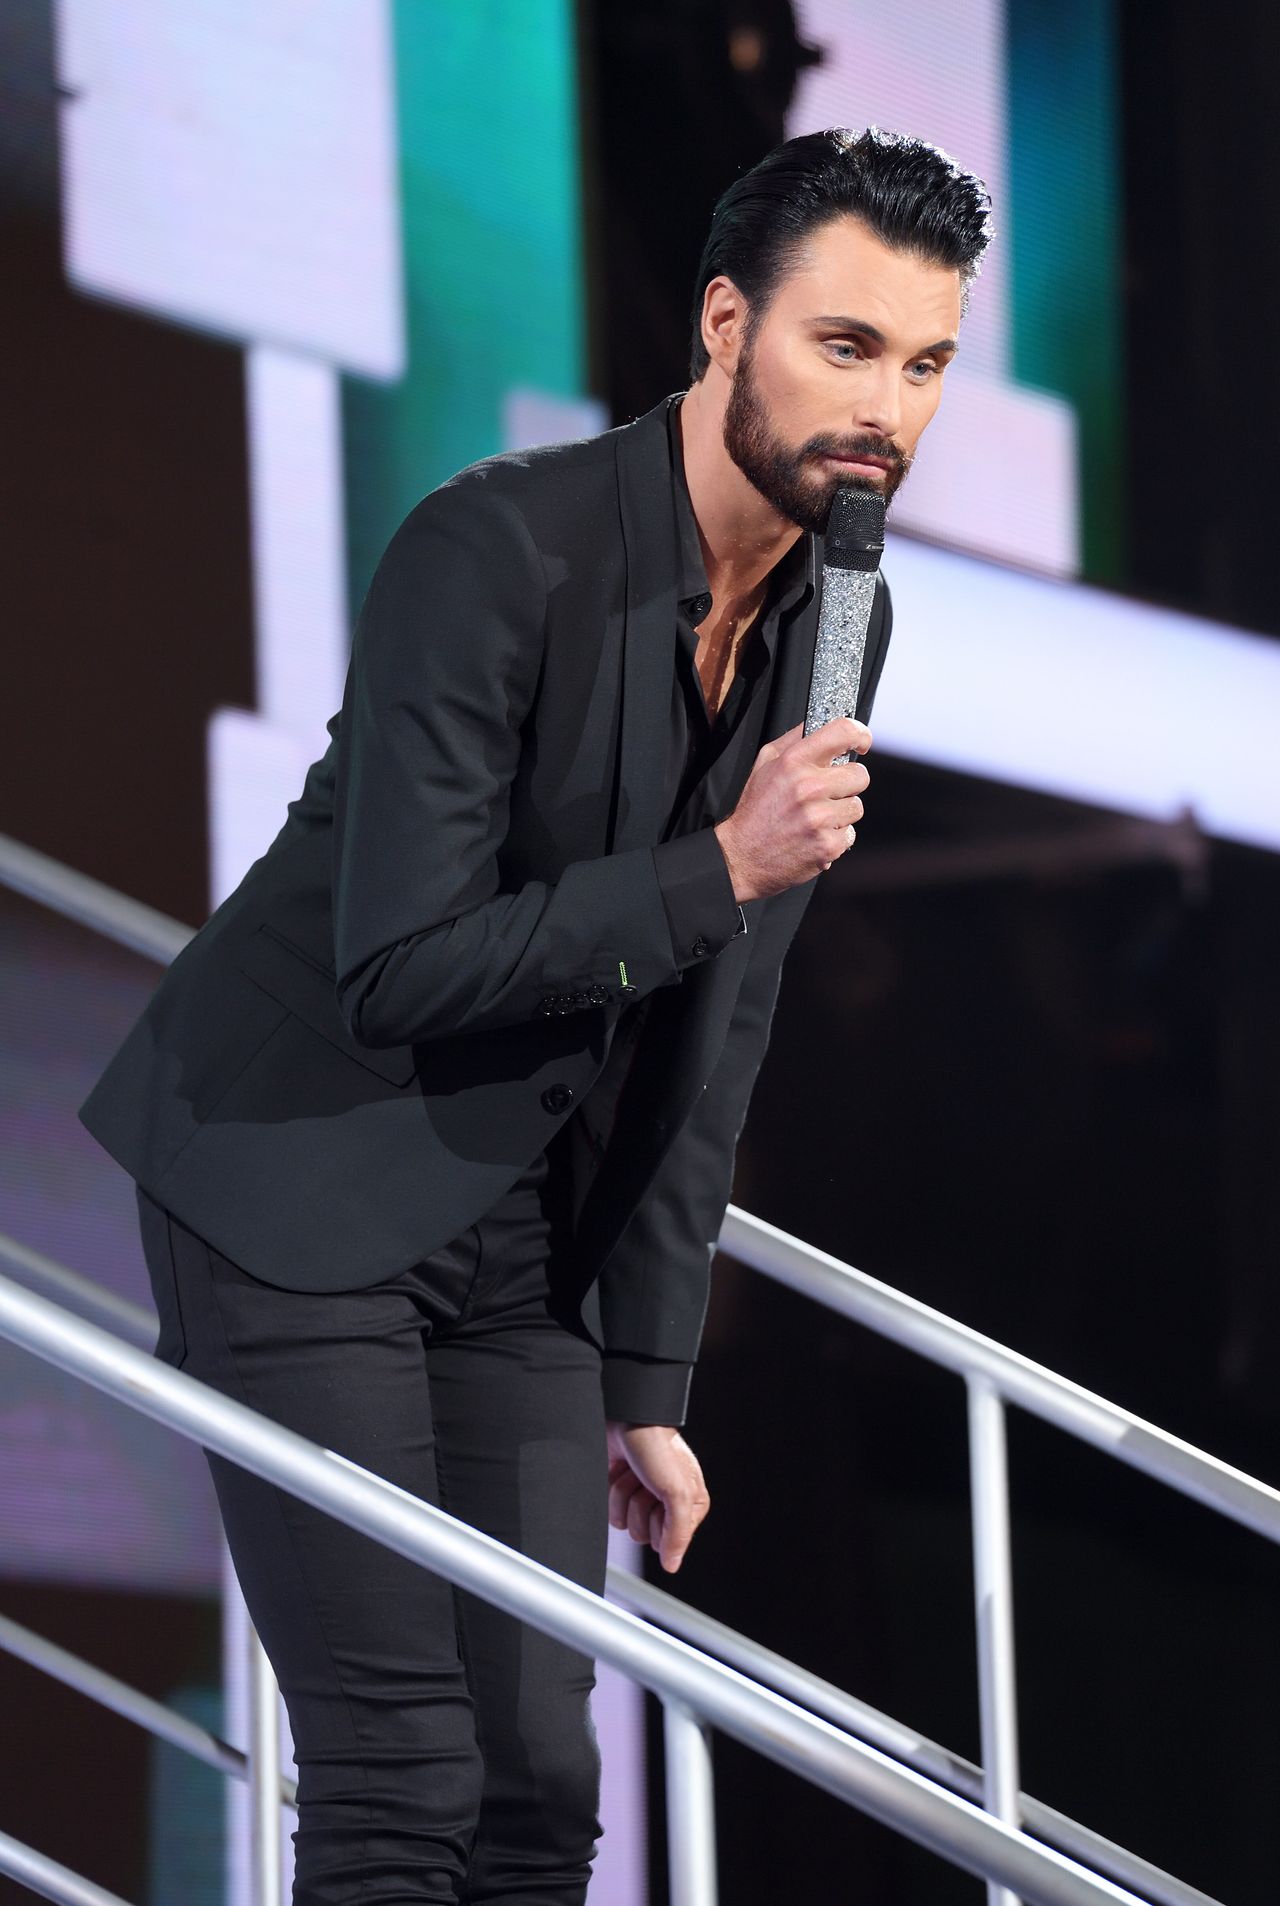 Rylan outside the Celebrity Big Brother house in 2018